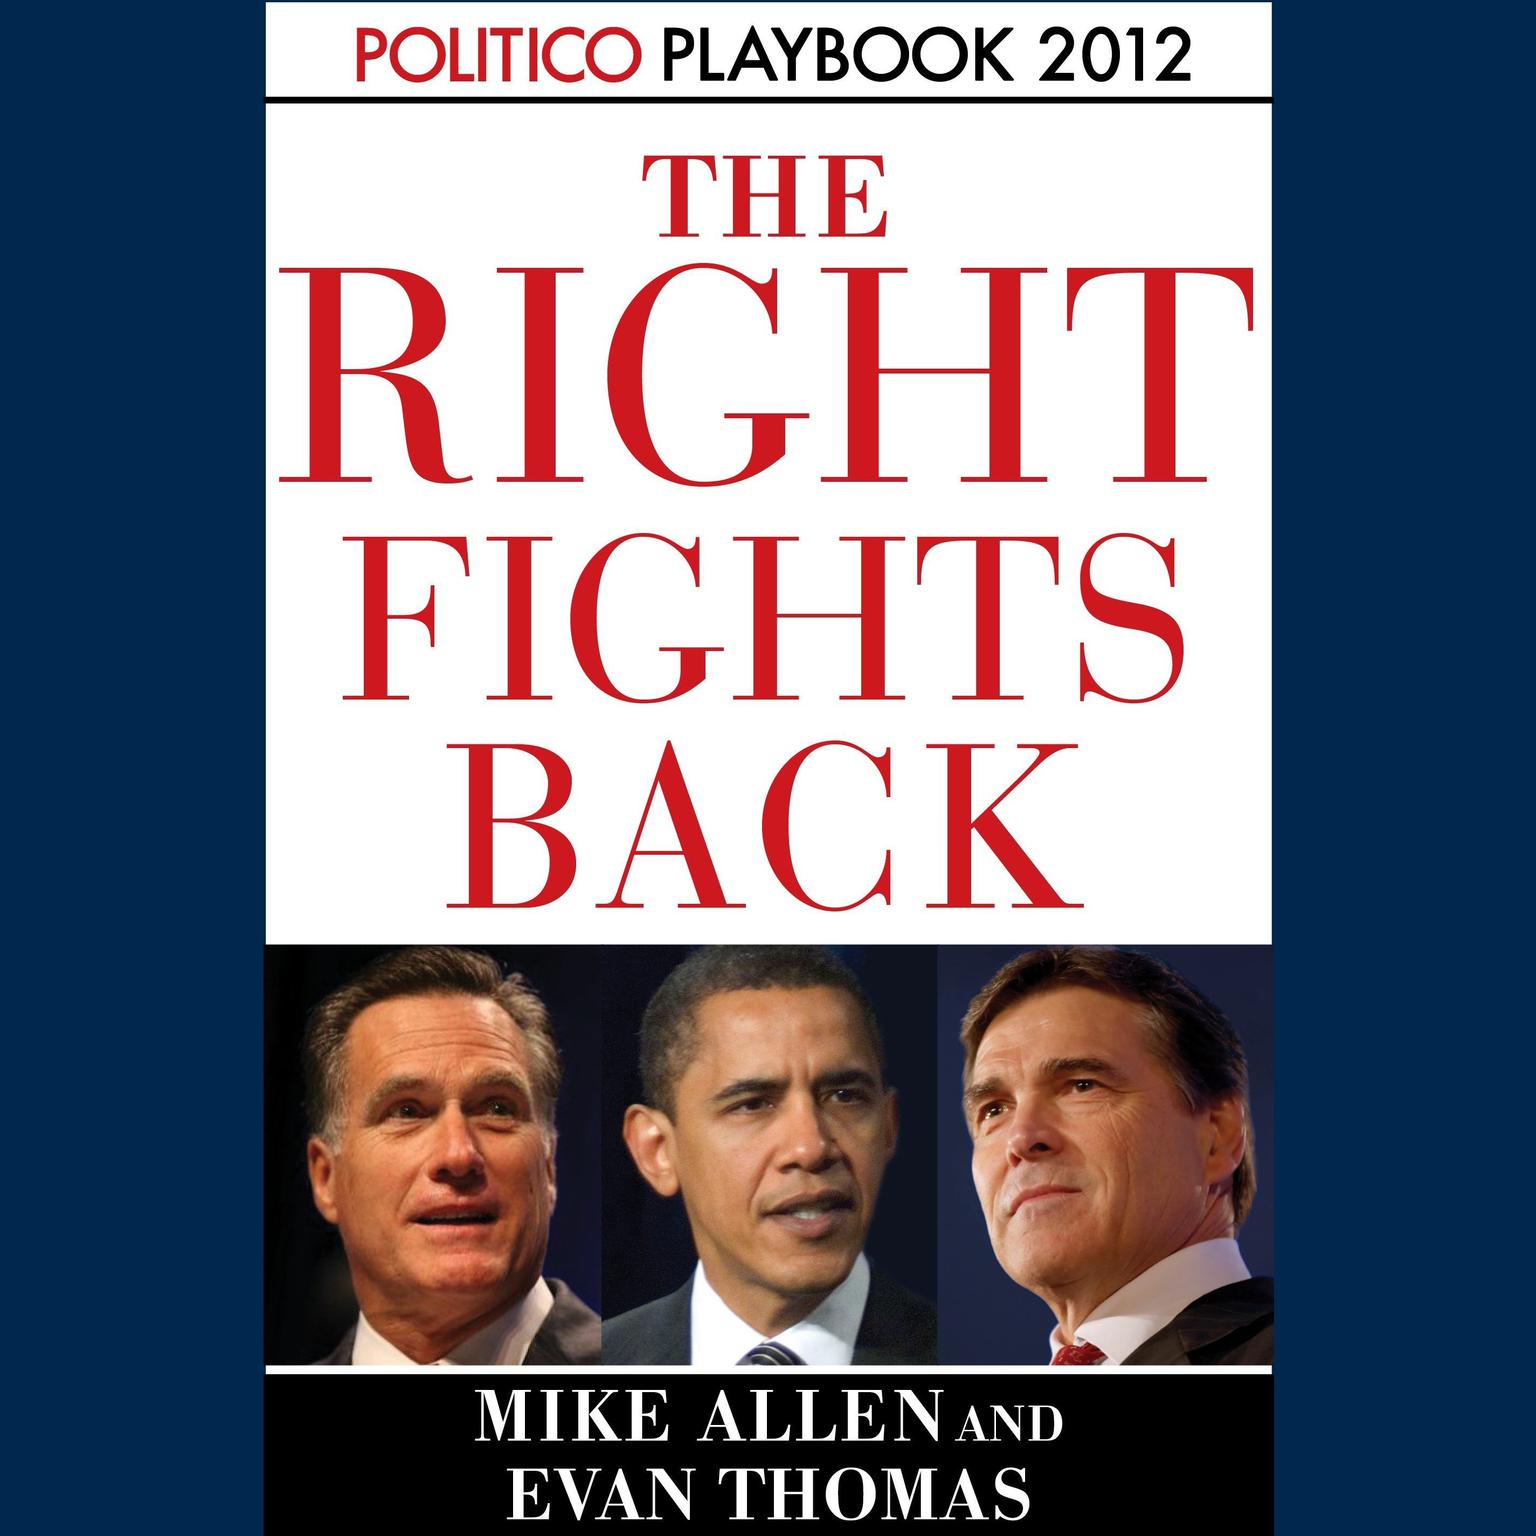 The Right Fights Back: Playbook 2012 (POLITICO Inside Election 2012) Audiobook, by Mike Allen